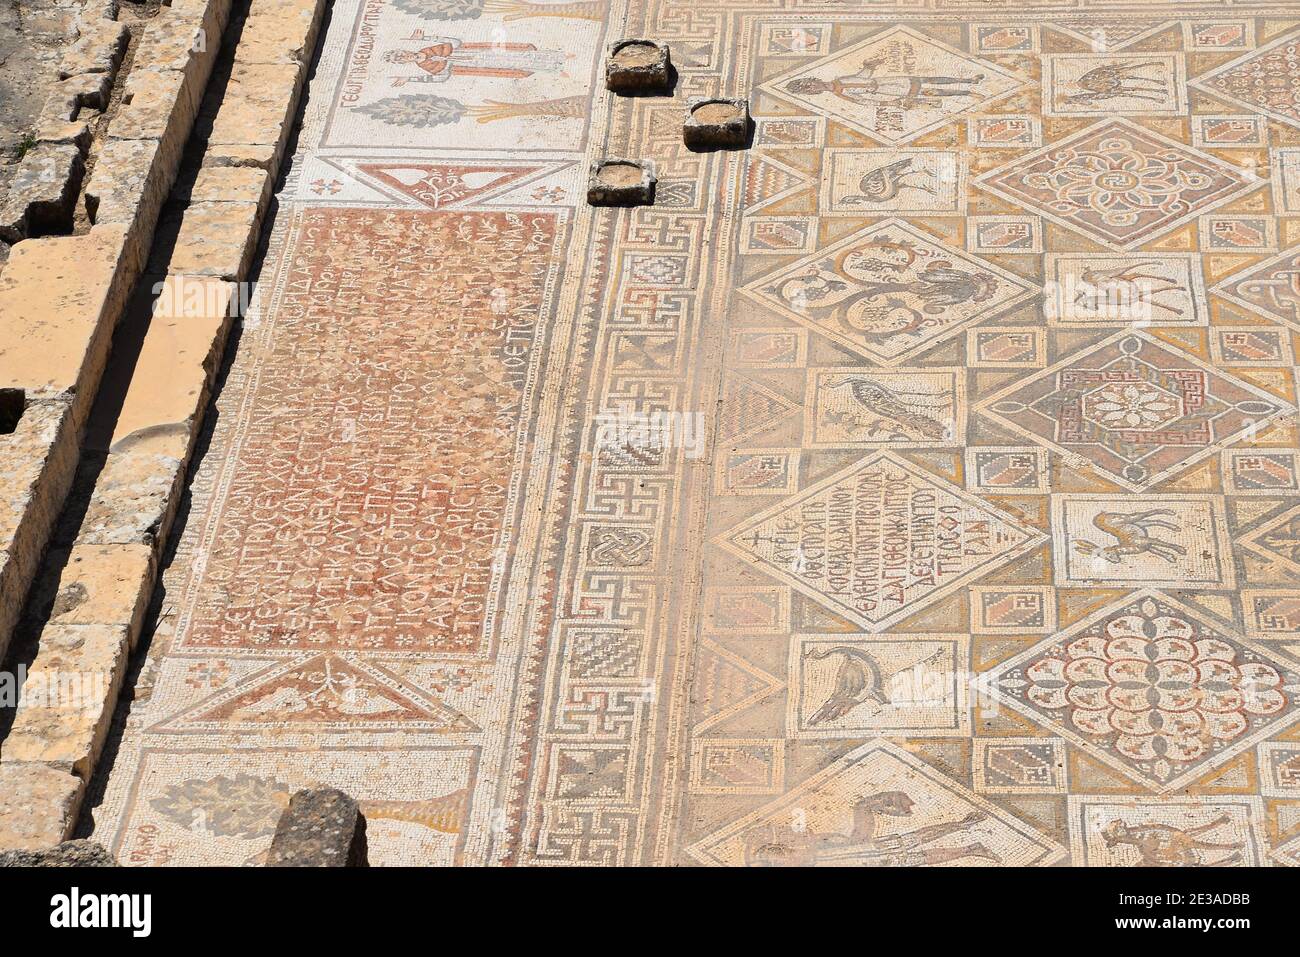 Byzantine mosaic on the floor of Church of St John the Baptist ruins in Jerash (Gerasa), Jordan, Middle East. Mosaic floor from byzantine period. Stock Photo